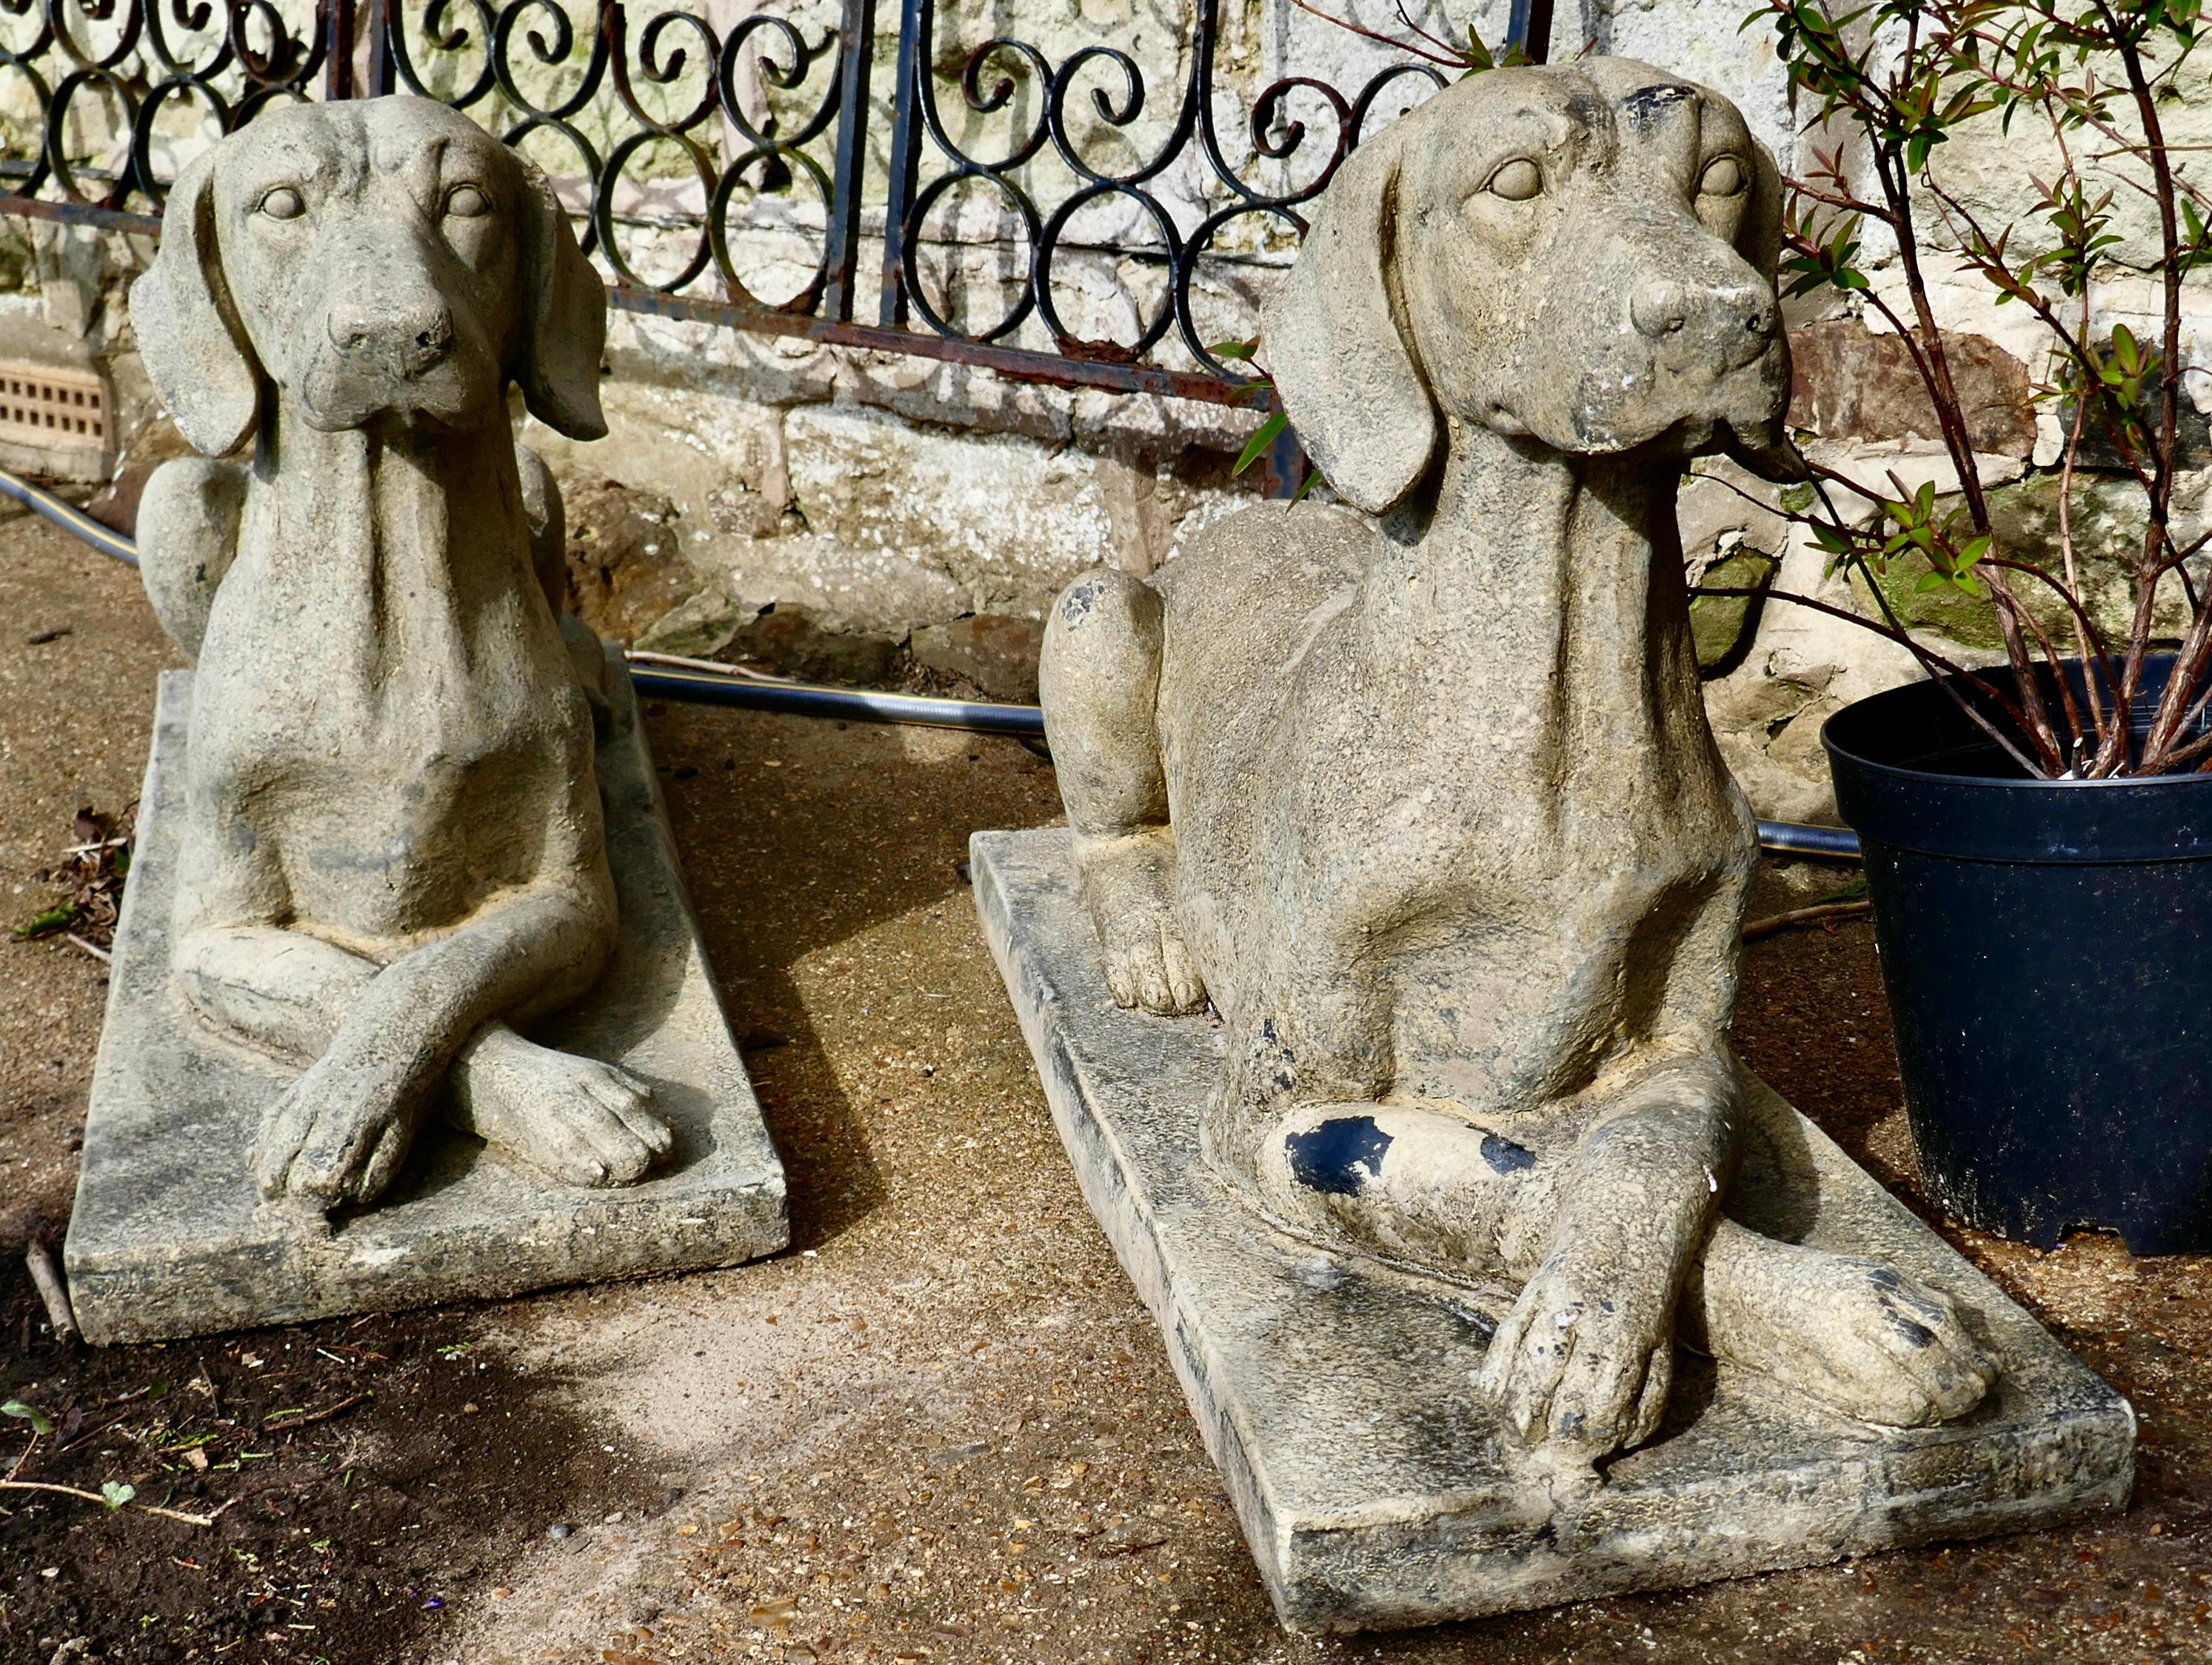 Pair of Large Old Weathered Labradors Statues

A lovely pair of life-size Large Old Weathered labradors, this handsome pair have been guarding the Porch in all weathers for many years, they are laying down with their paws crossed 
They have some